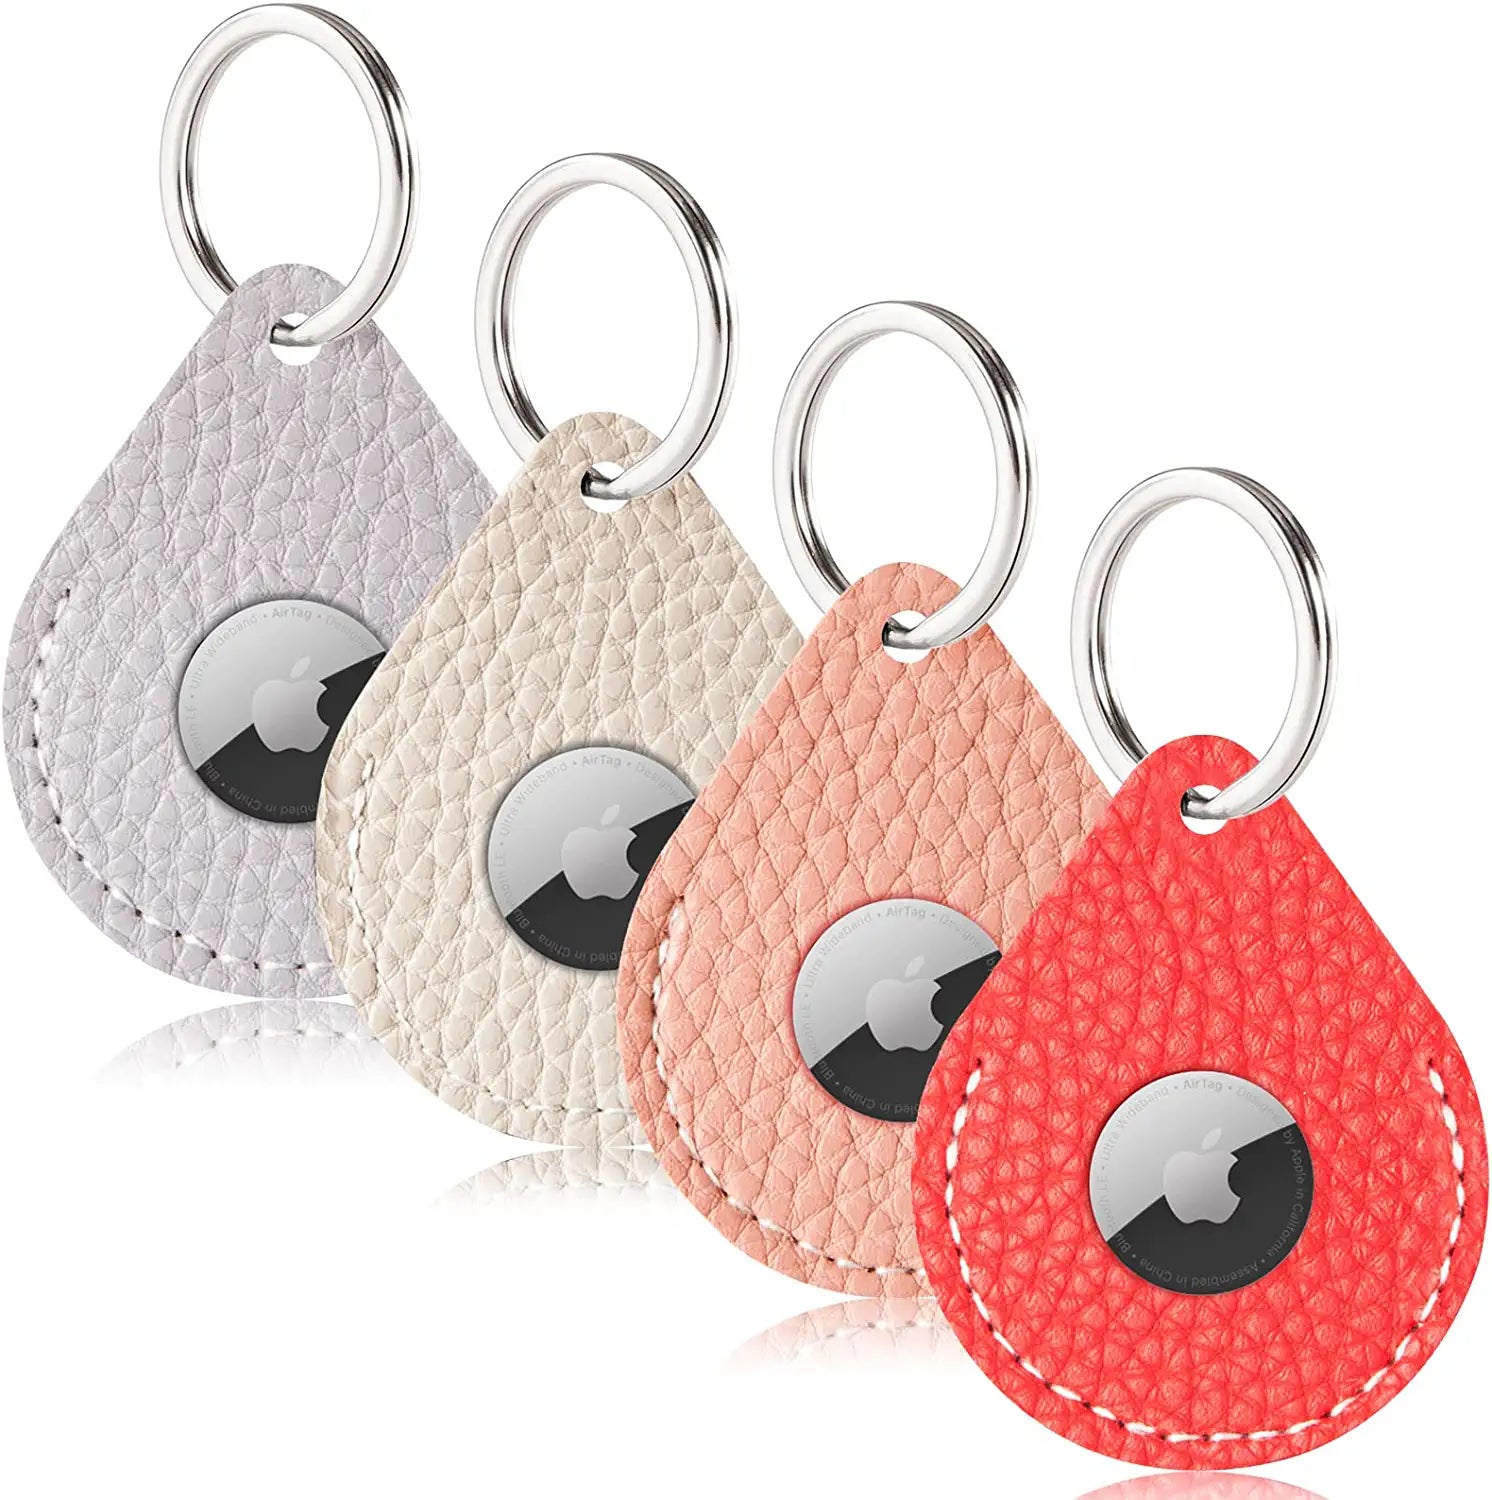 FOREVERFLYBIRD 4 Pack Airtag Holder Leather Case Air Tag Cover Keychain GPS Tracker Remote Finder Key Travel Backpack Pet Locator,Grey,White,Pink,Red